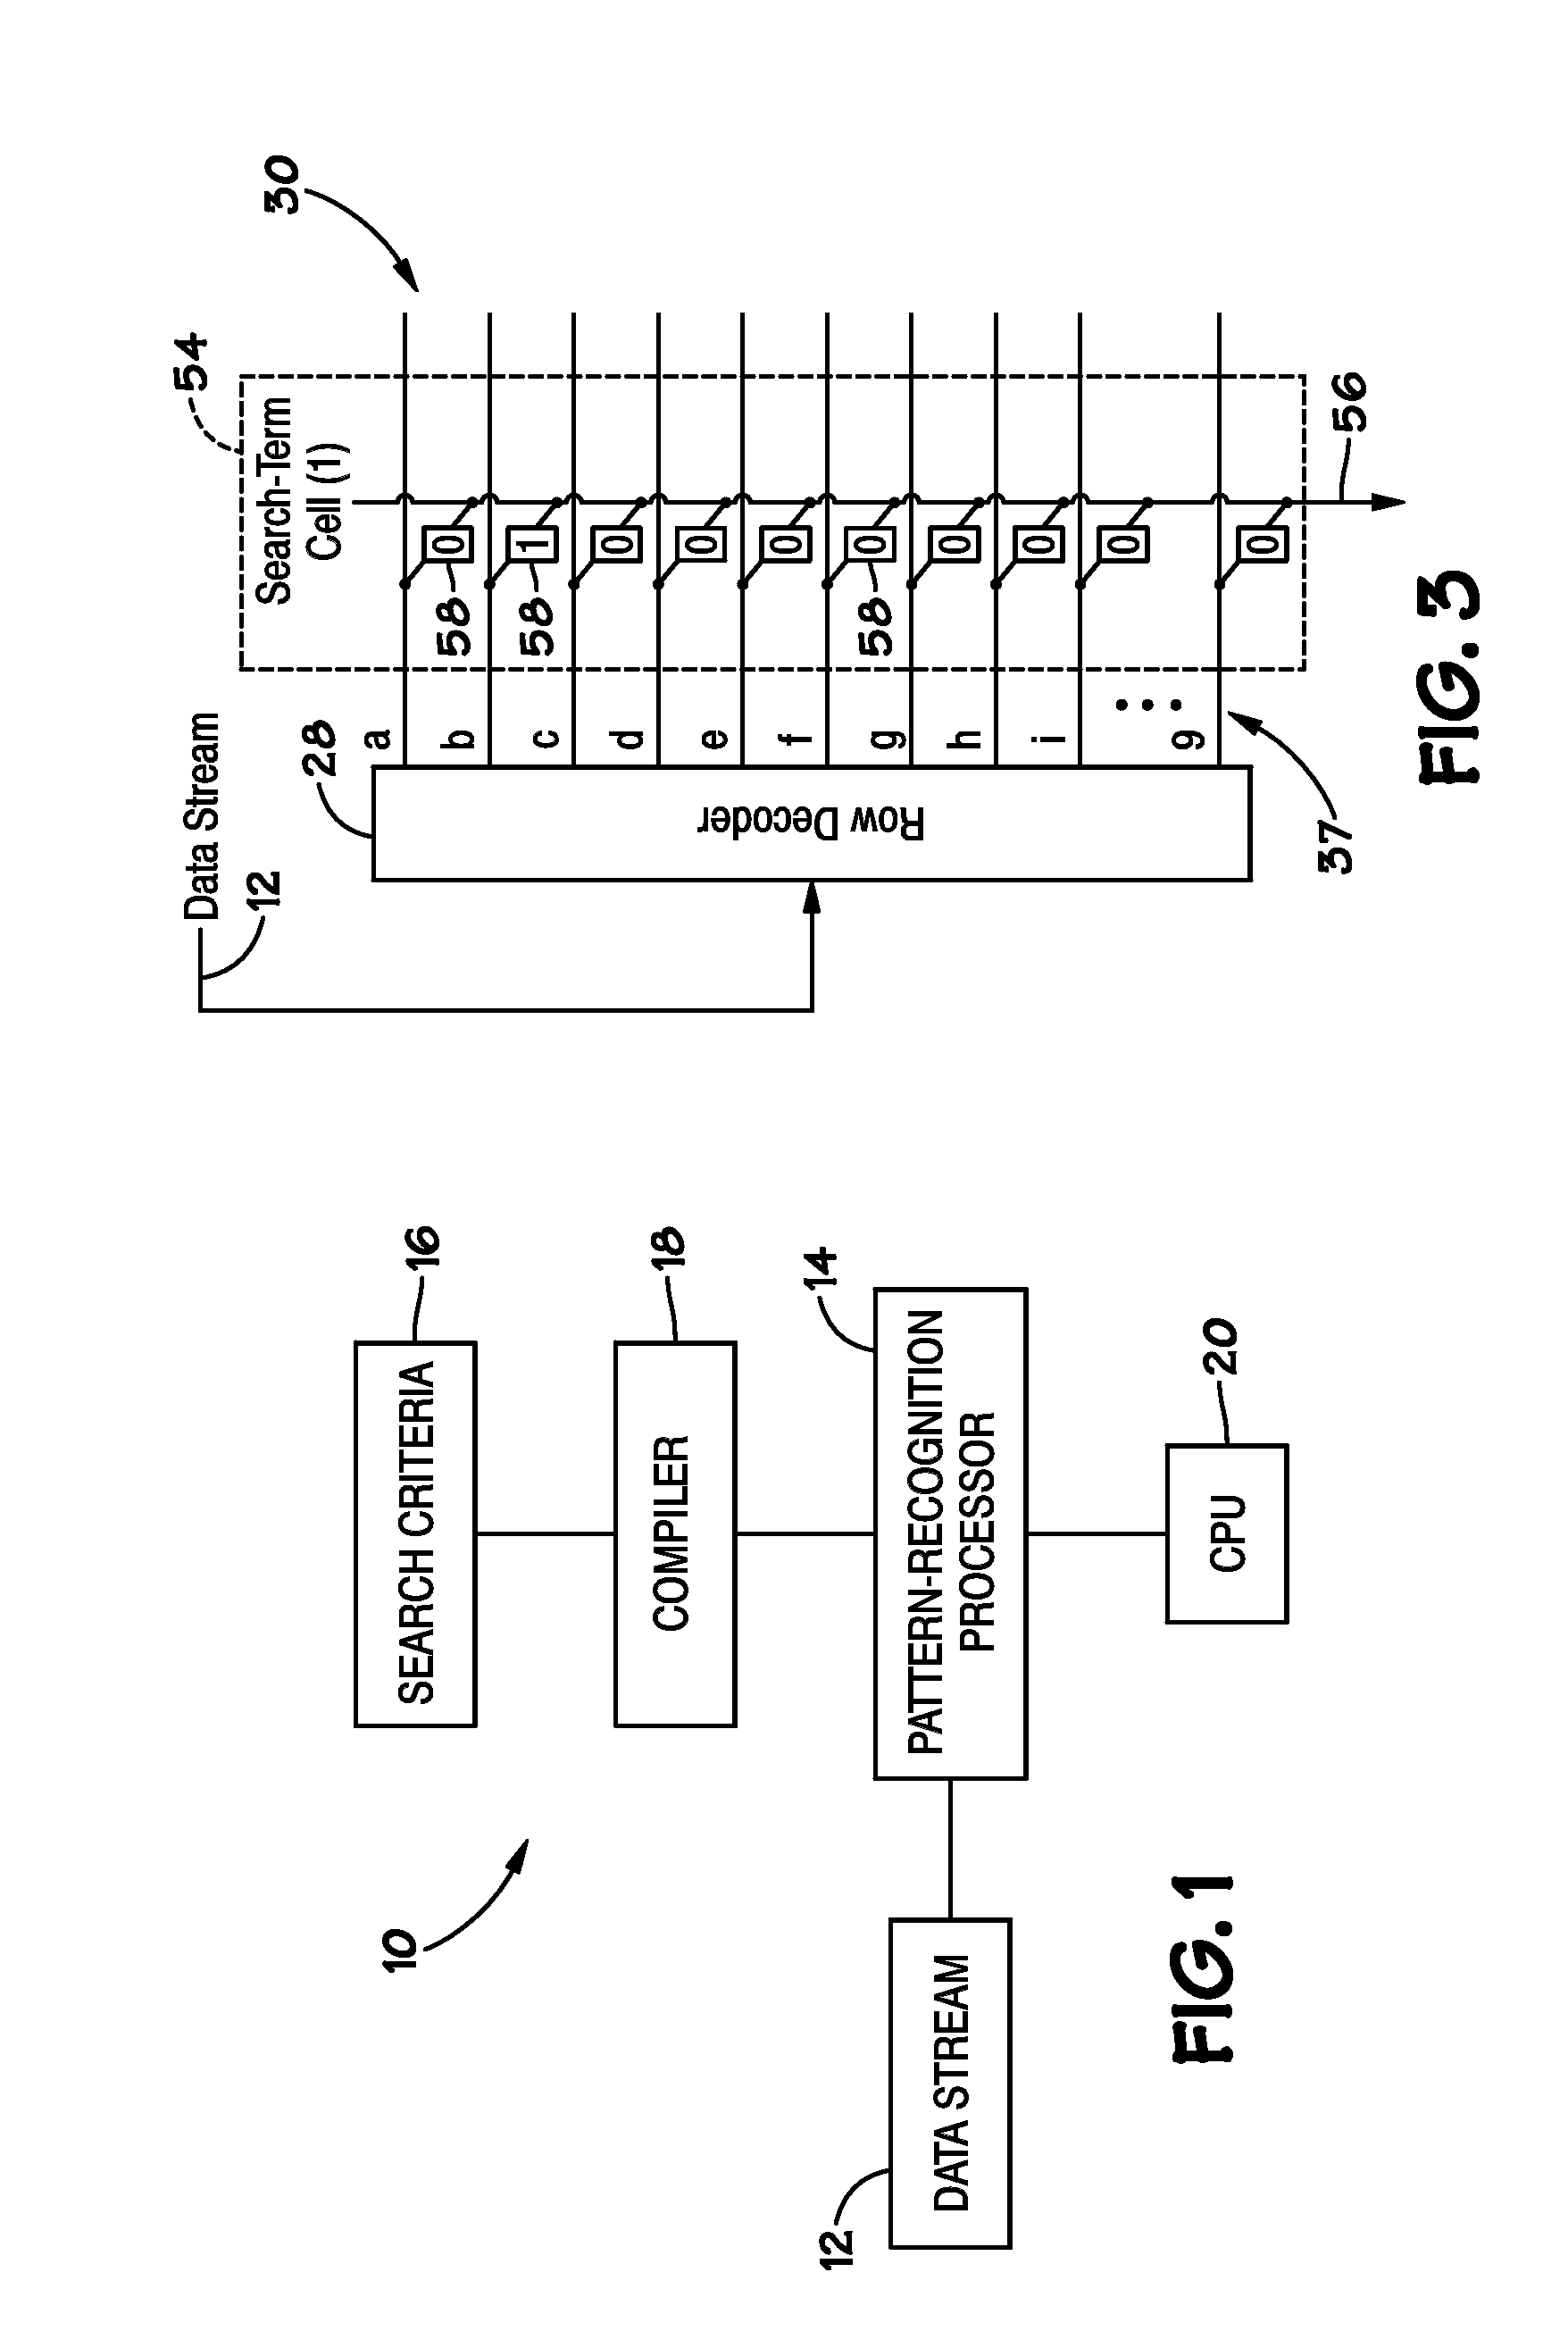 Multi-level hierarchical routing matrices for pattern-recognition processors